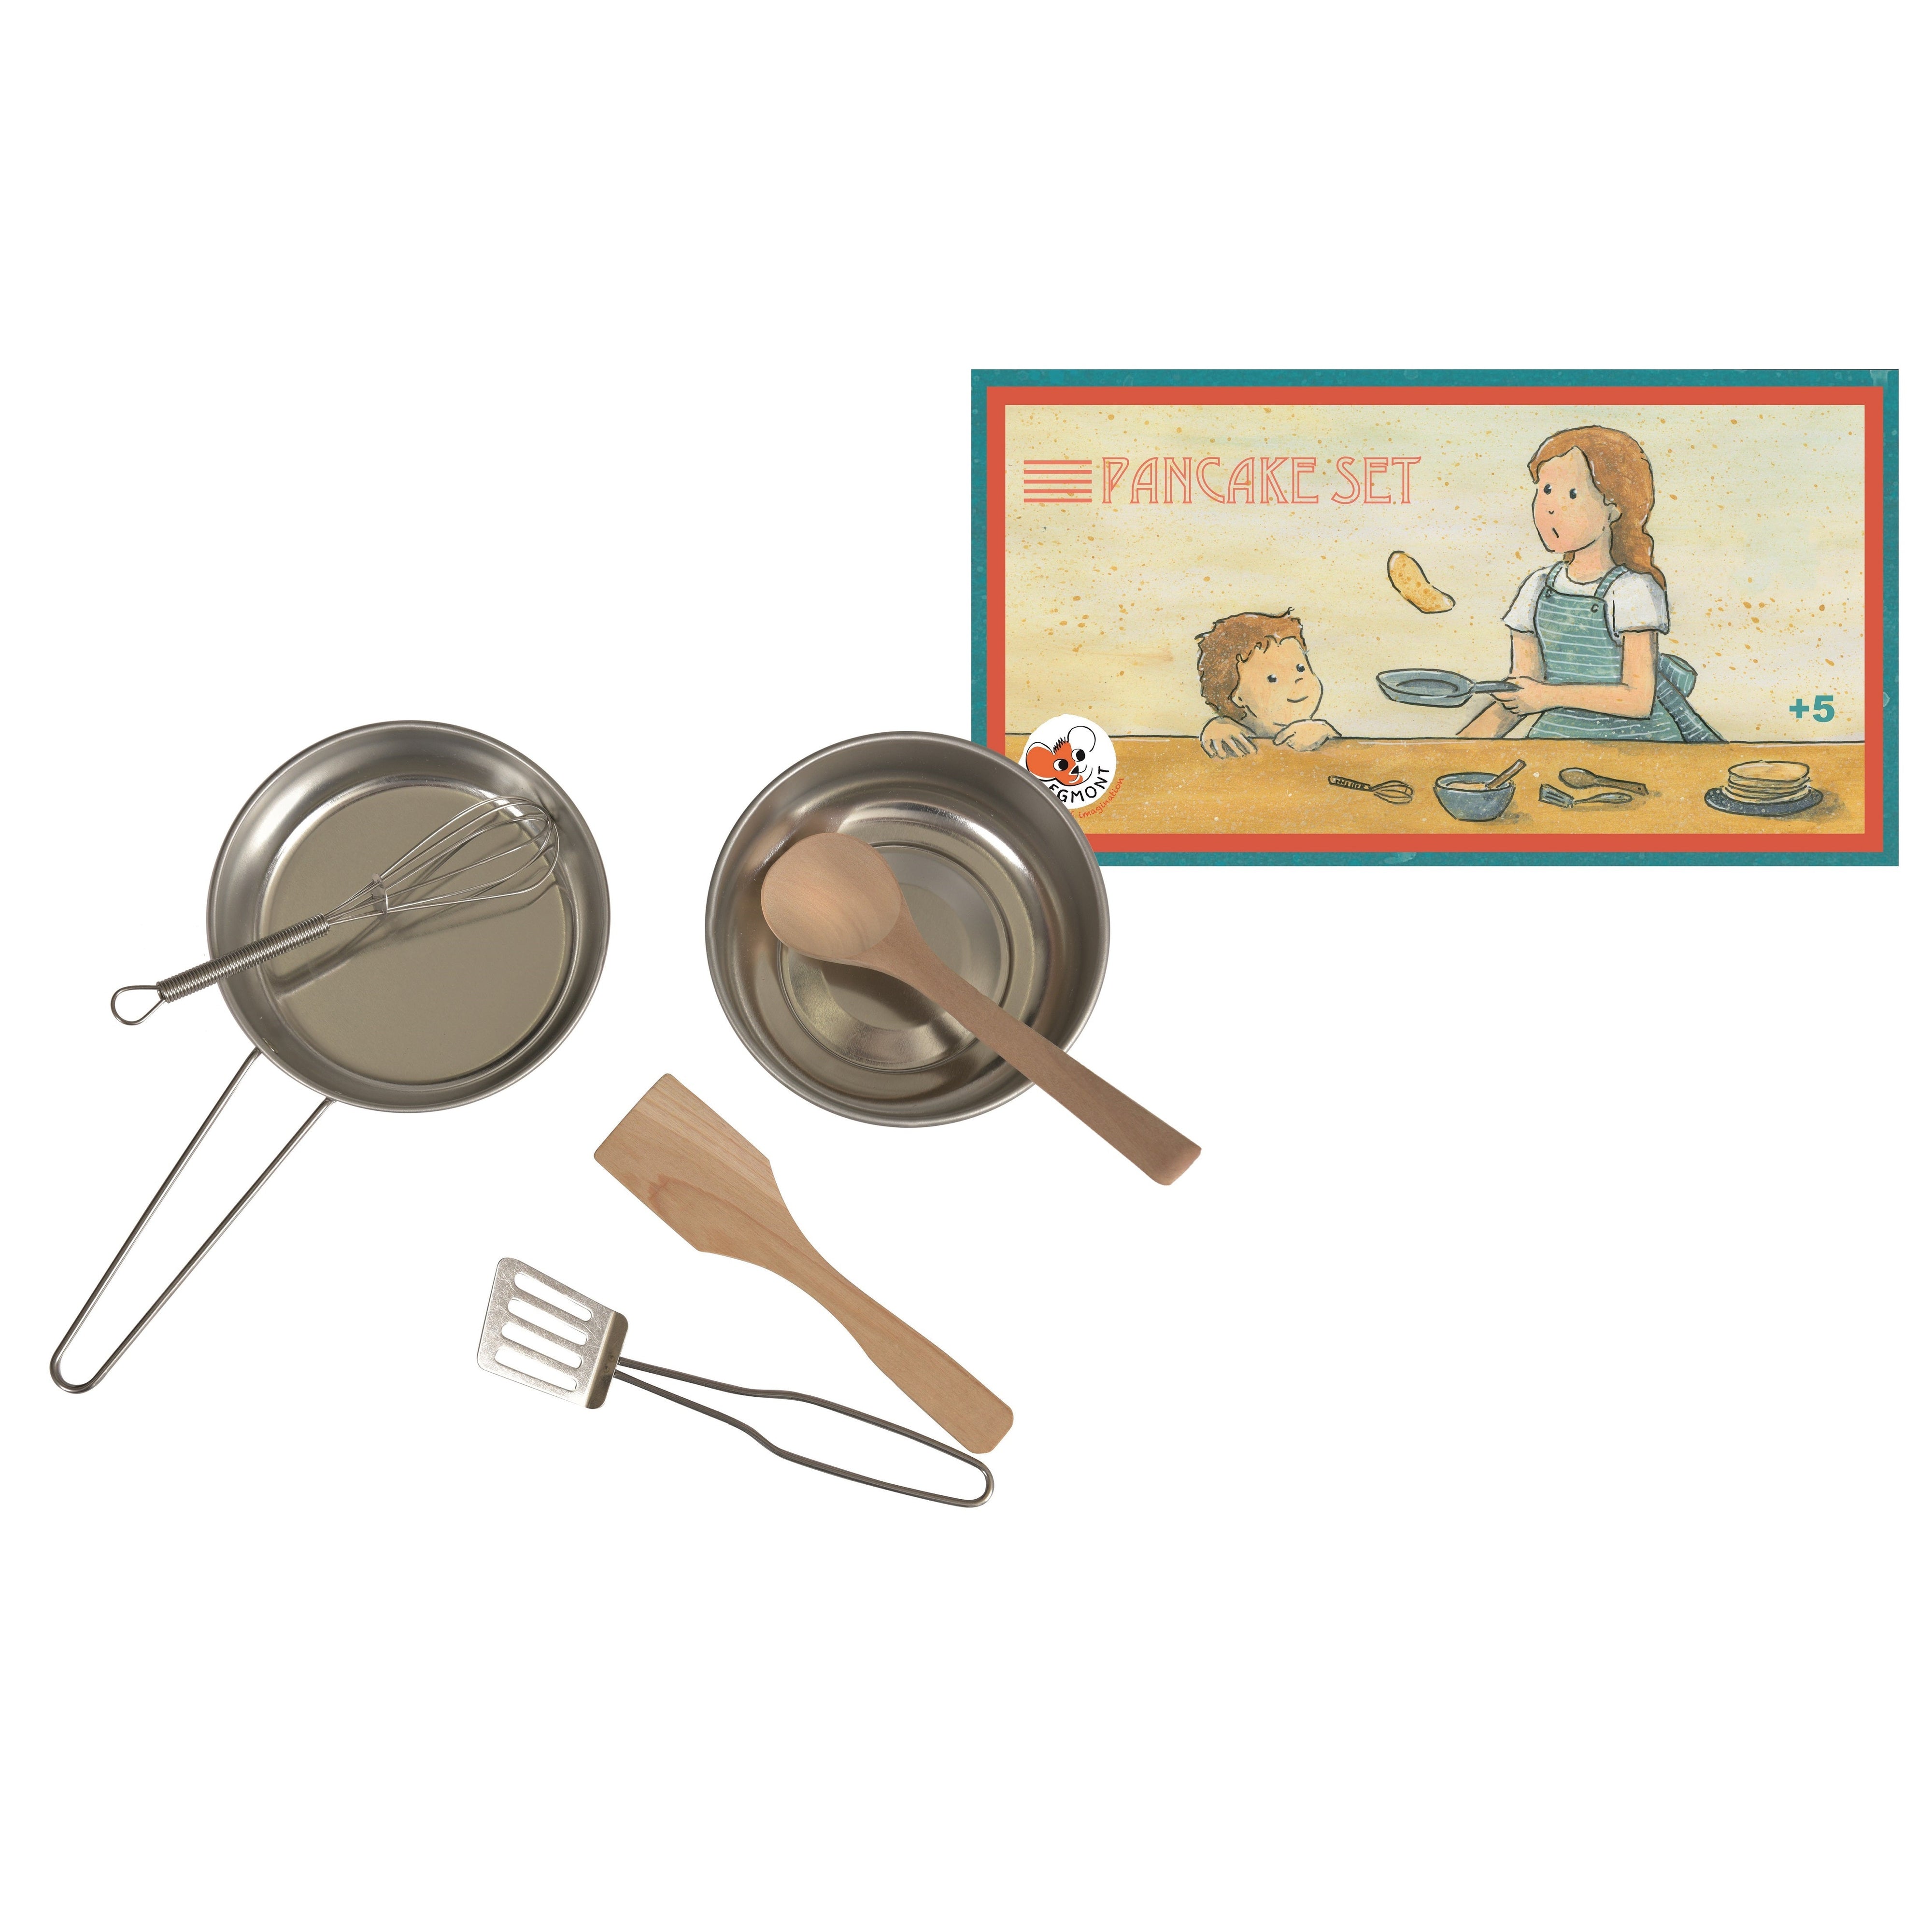 Egmont Pancake Set with Recipe Play Food Accessories